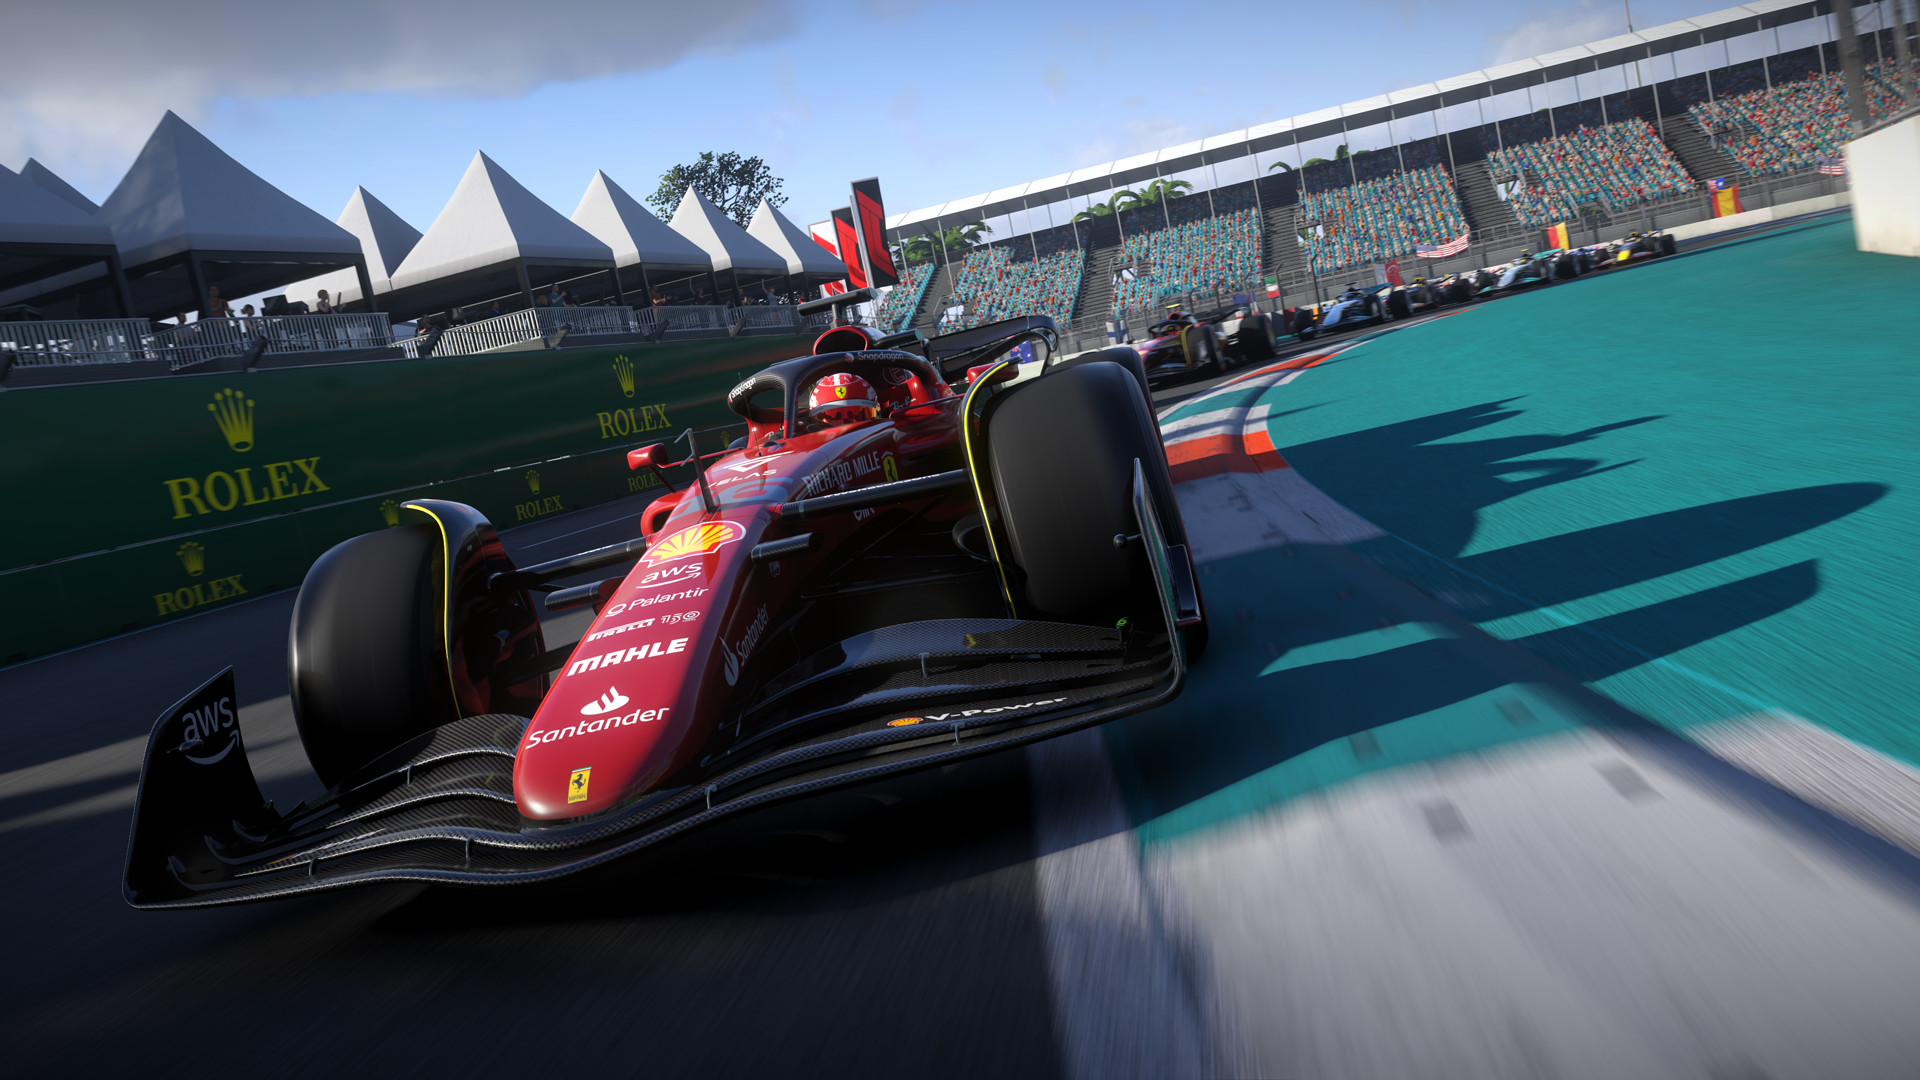 F1 22 Cross-Play Coming August End, Weekend Trials Announced